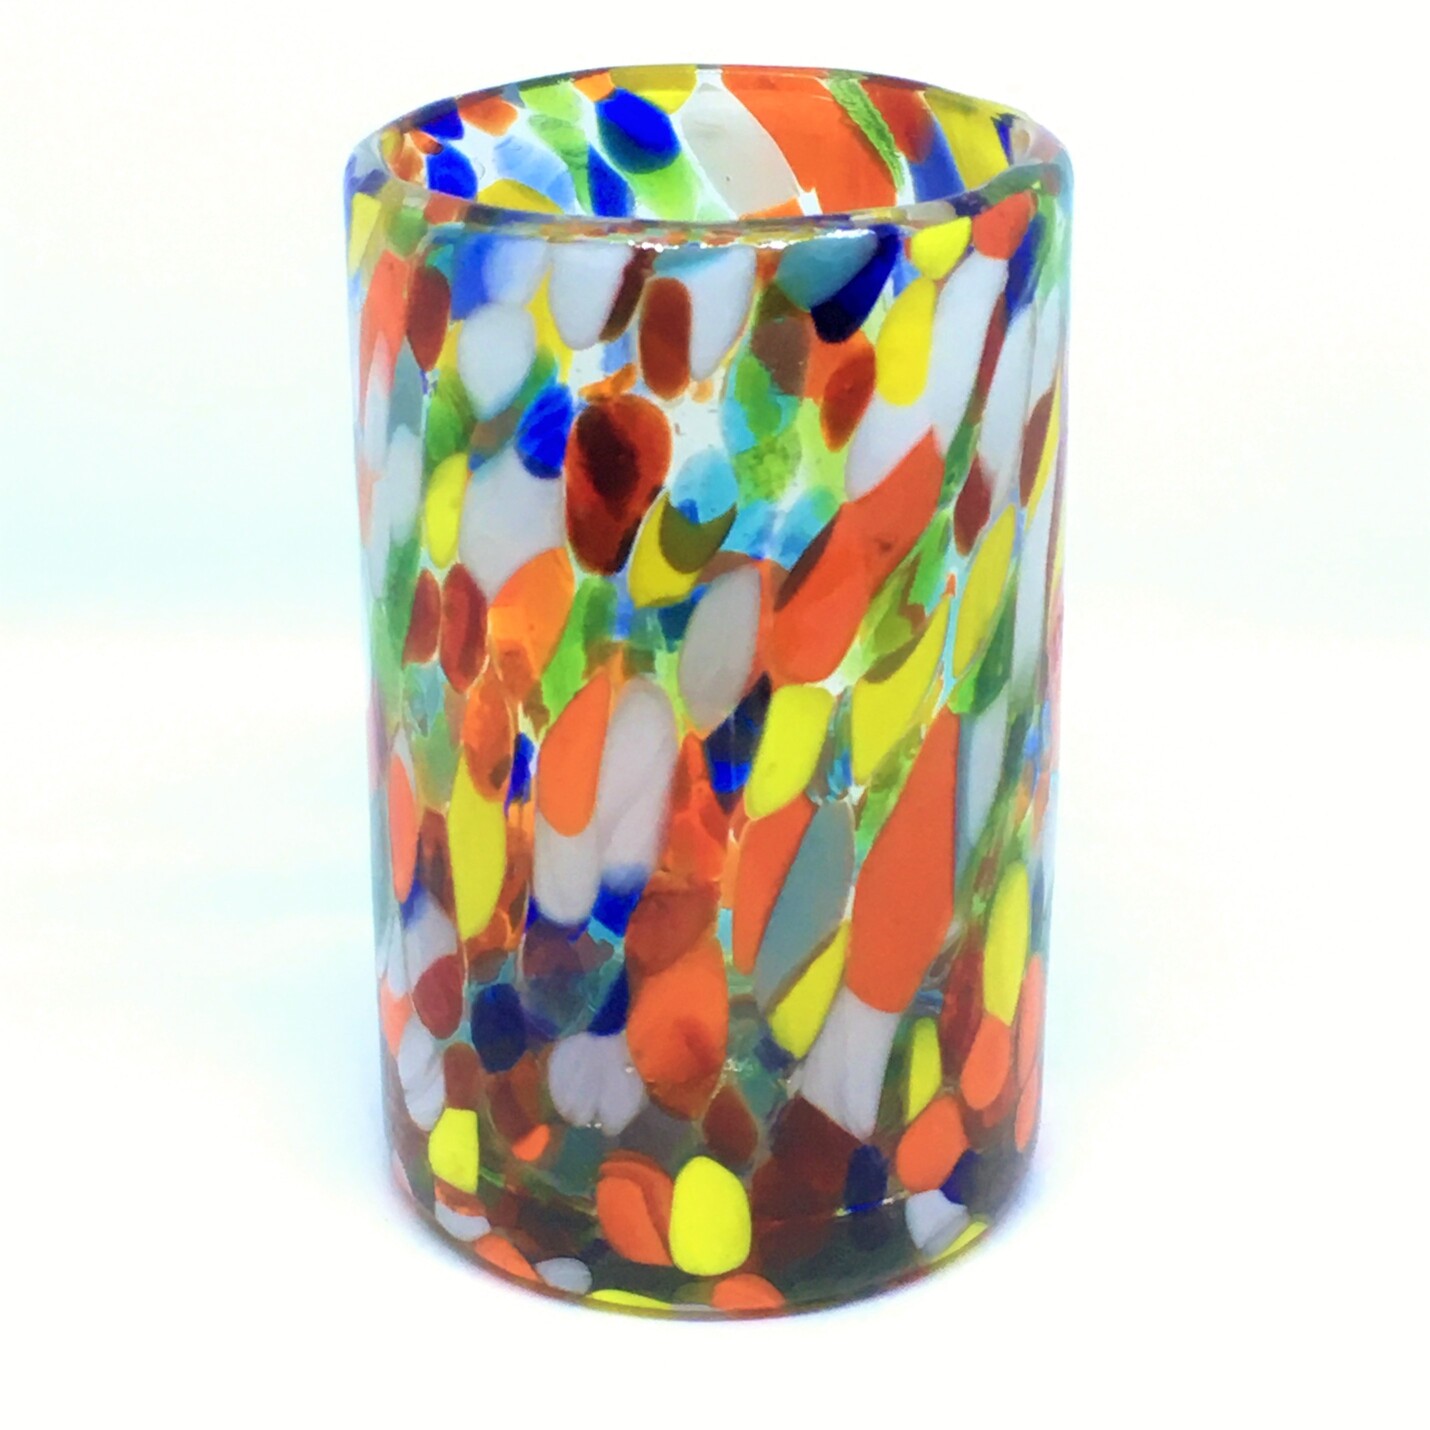 MEXICAN GLASSWARE / Confetti Carnival 14 oz Drinking Glasses (set of 6) / Let the spring come into your home with this colorful set of glasses. The multicolor glass decoration makes them a standout in any place.